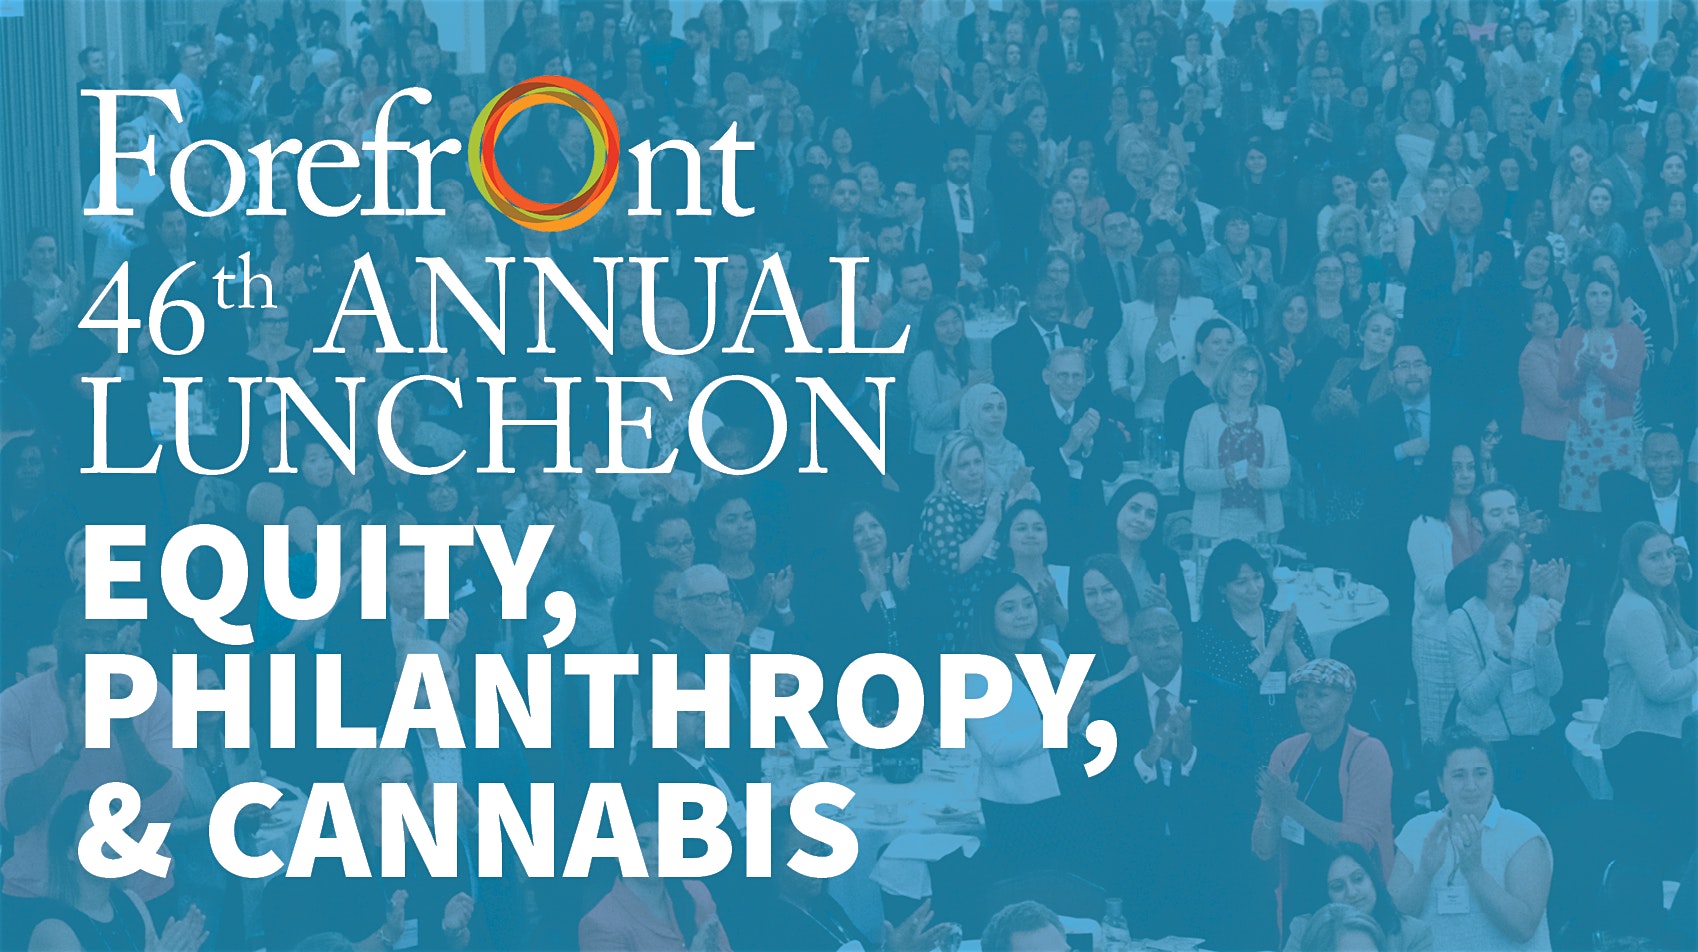 Forefront’s 46th Annual Luncheon